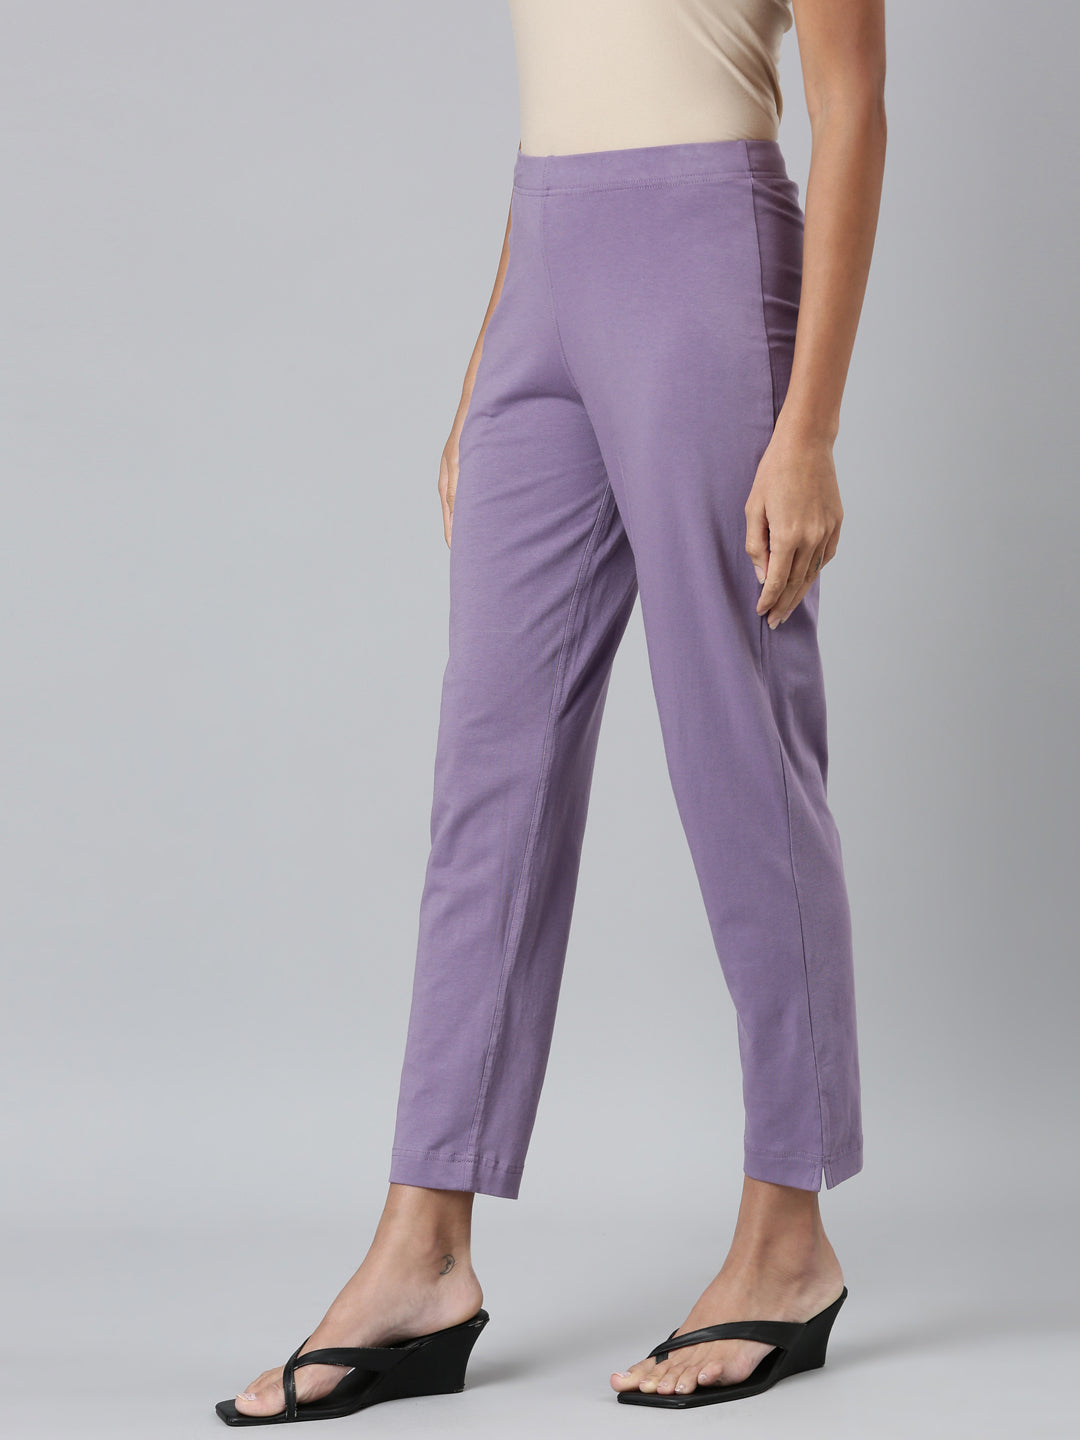 Buy Anaro Skin Women Cotton Lycra Pencil Pant (Kurti Pant/cigarette Pant)  suitable for formal and casual wear Online at Best Prices in India -  JioMart.